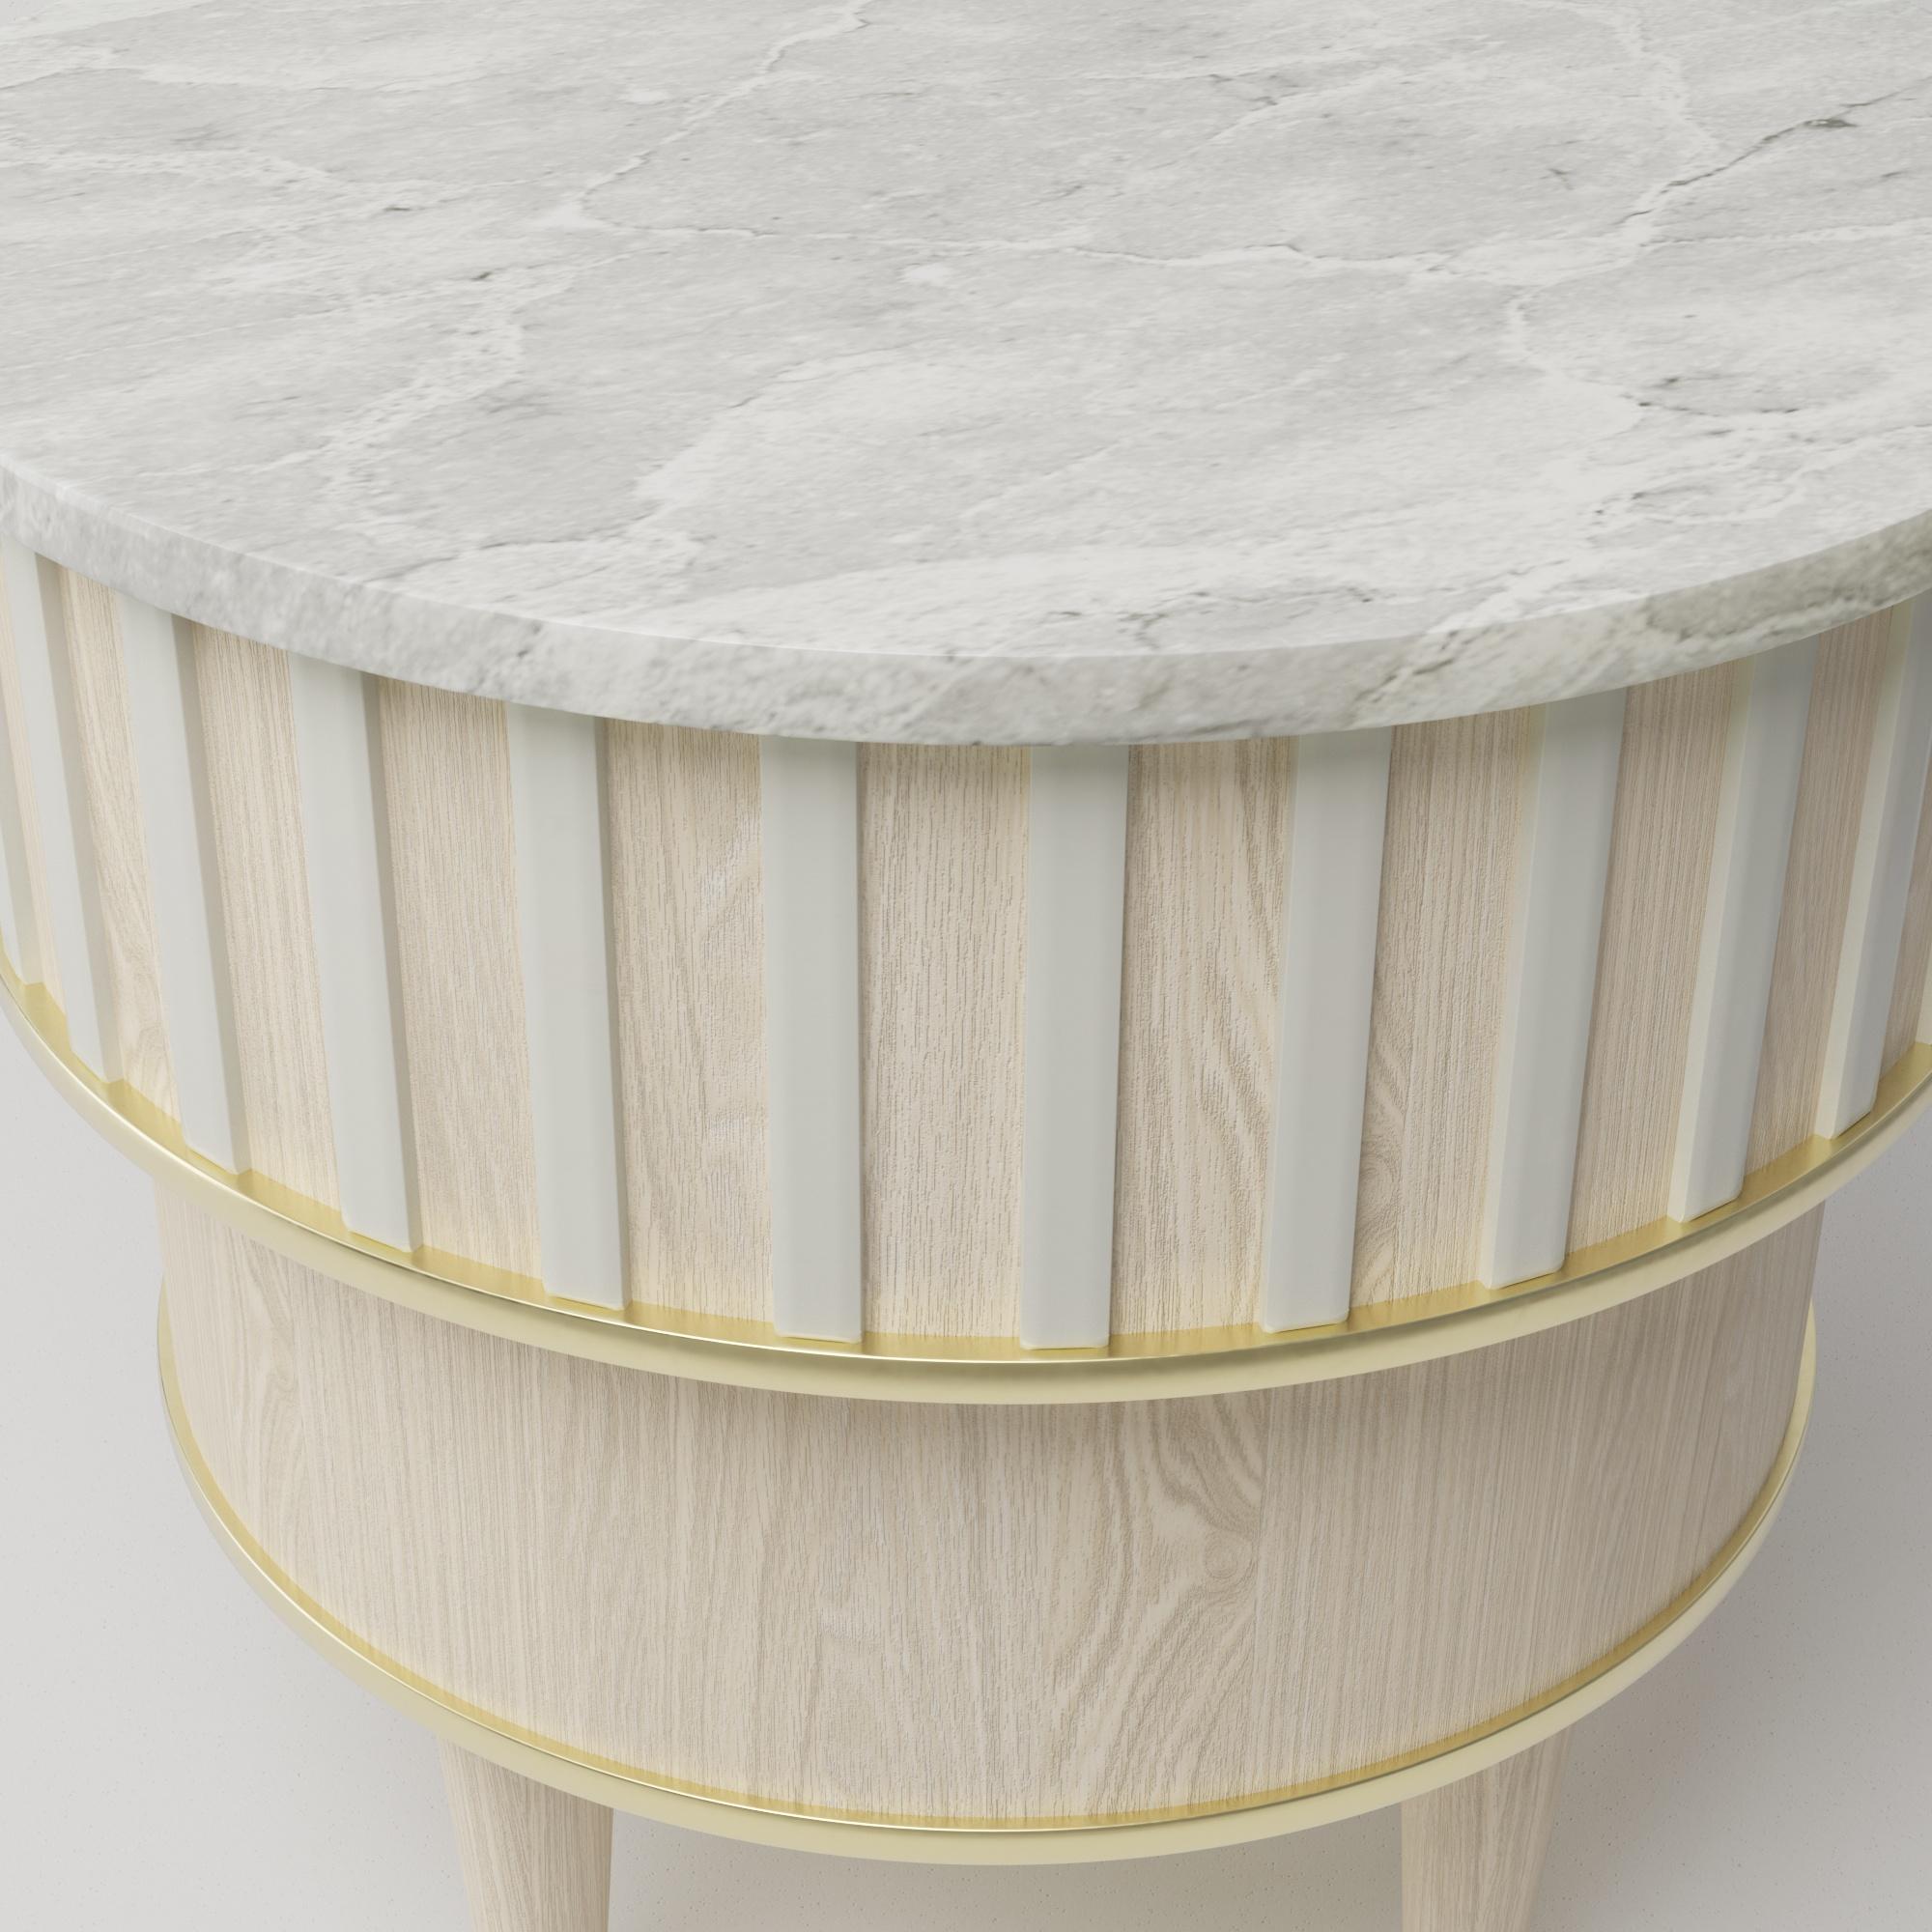 Greta white onyx side table by Felice James. The beautiful white onyx stone top is offset against the bone Corian, bleached oak and liquid brass. This side table evokes a dramatic, illusive feel.